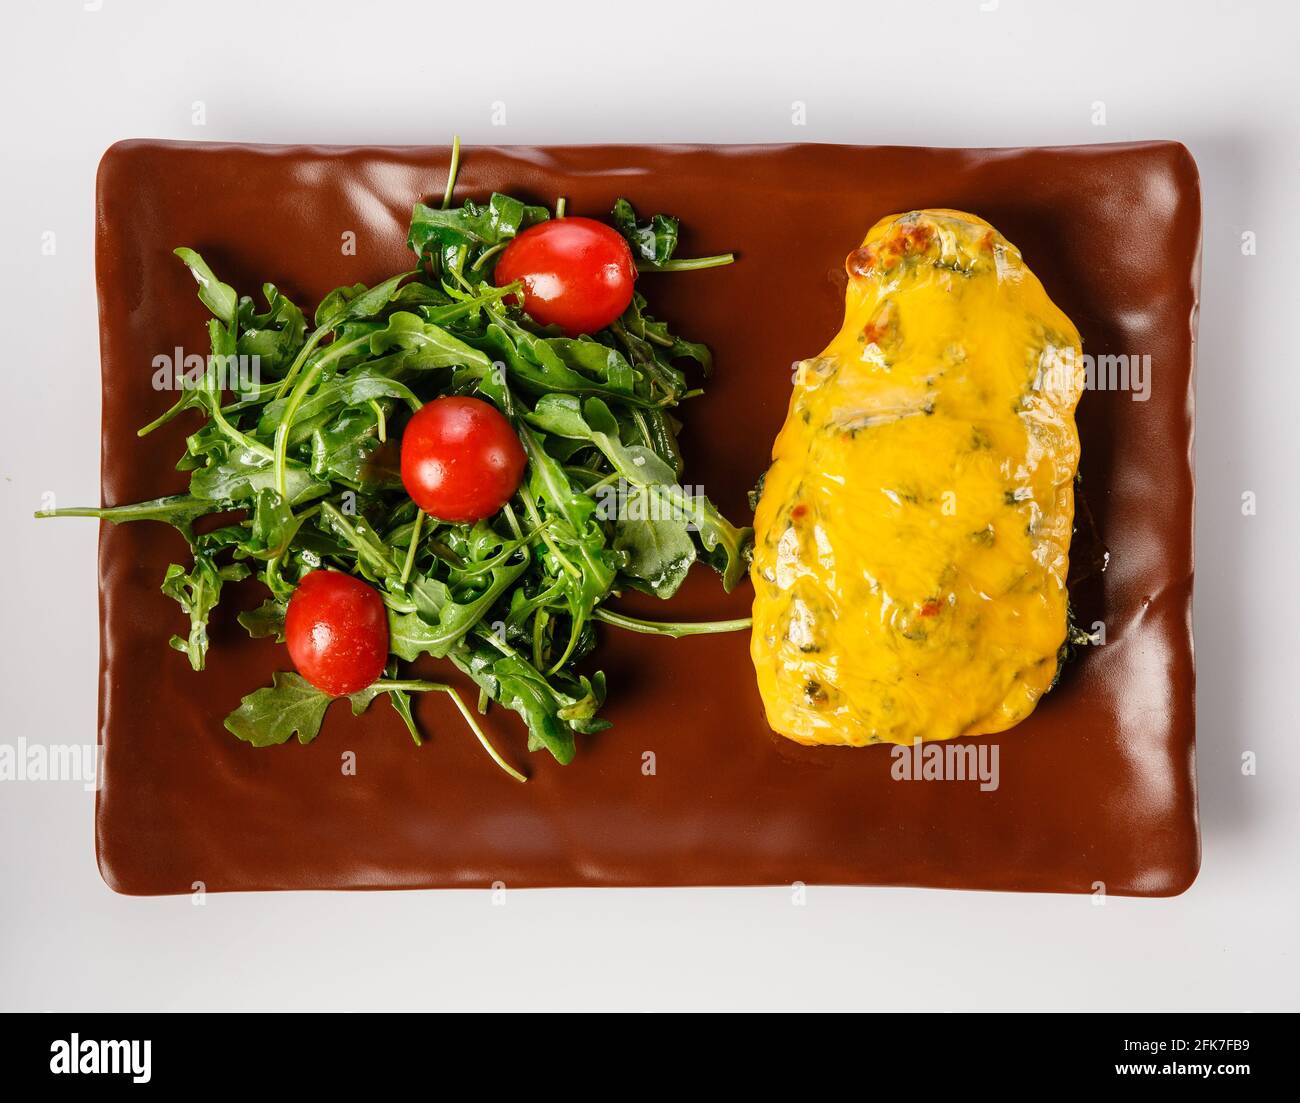 Fillet with cheese and spinach. Stock Photo